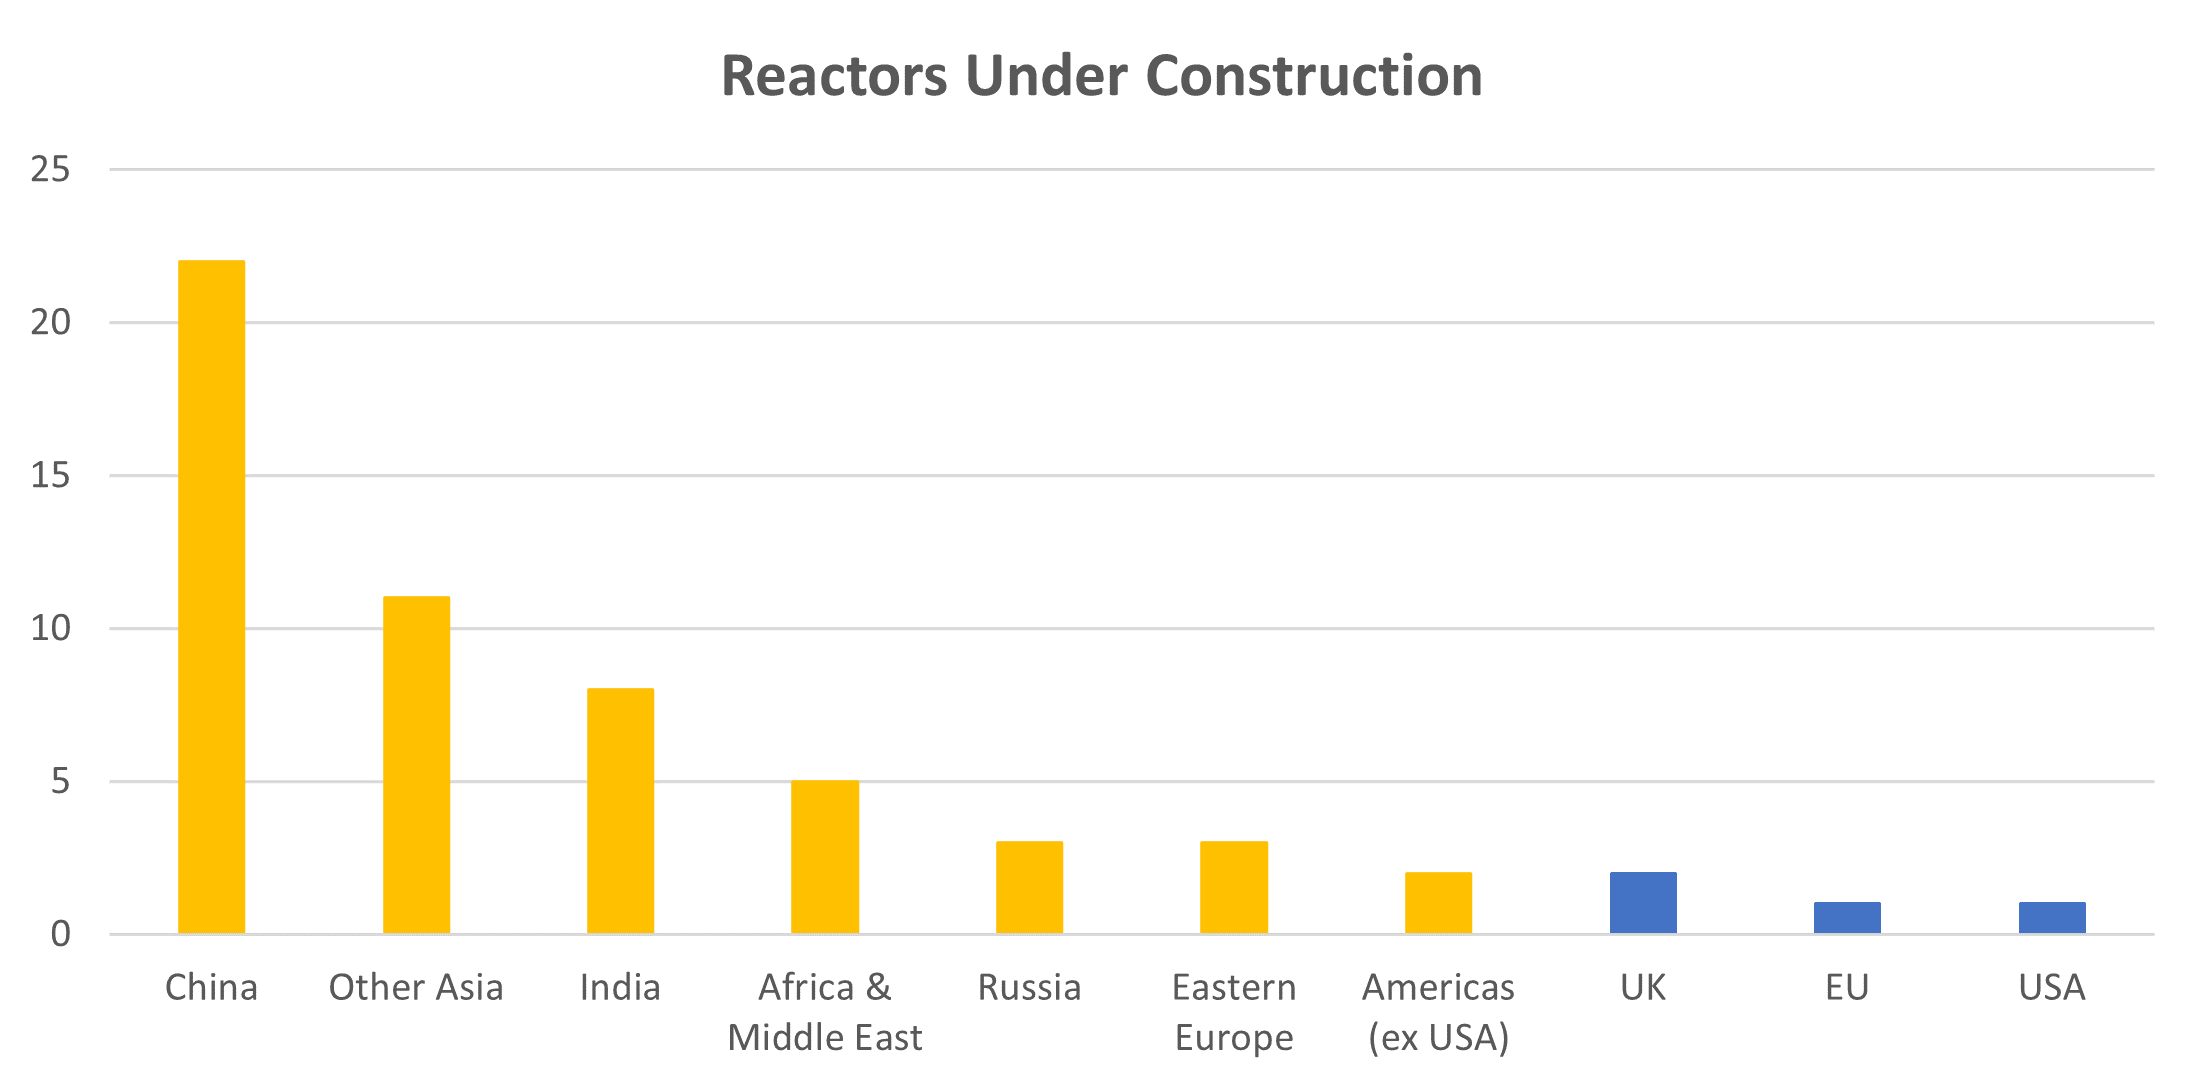 Figure 2. Reactors under construction (developing nations in orange). Source: World Nuclear Association